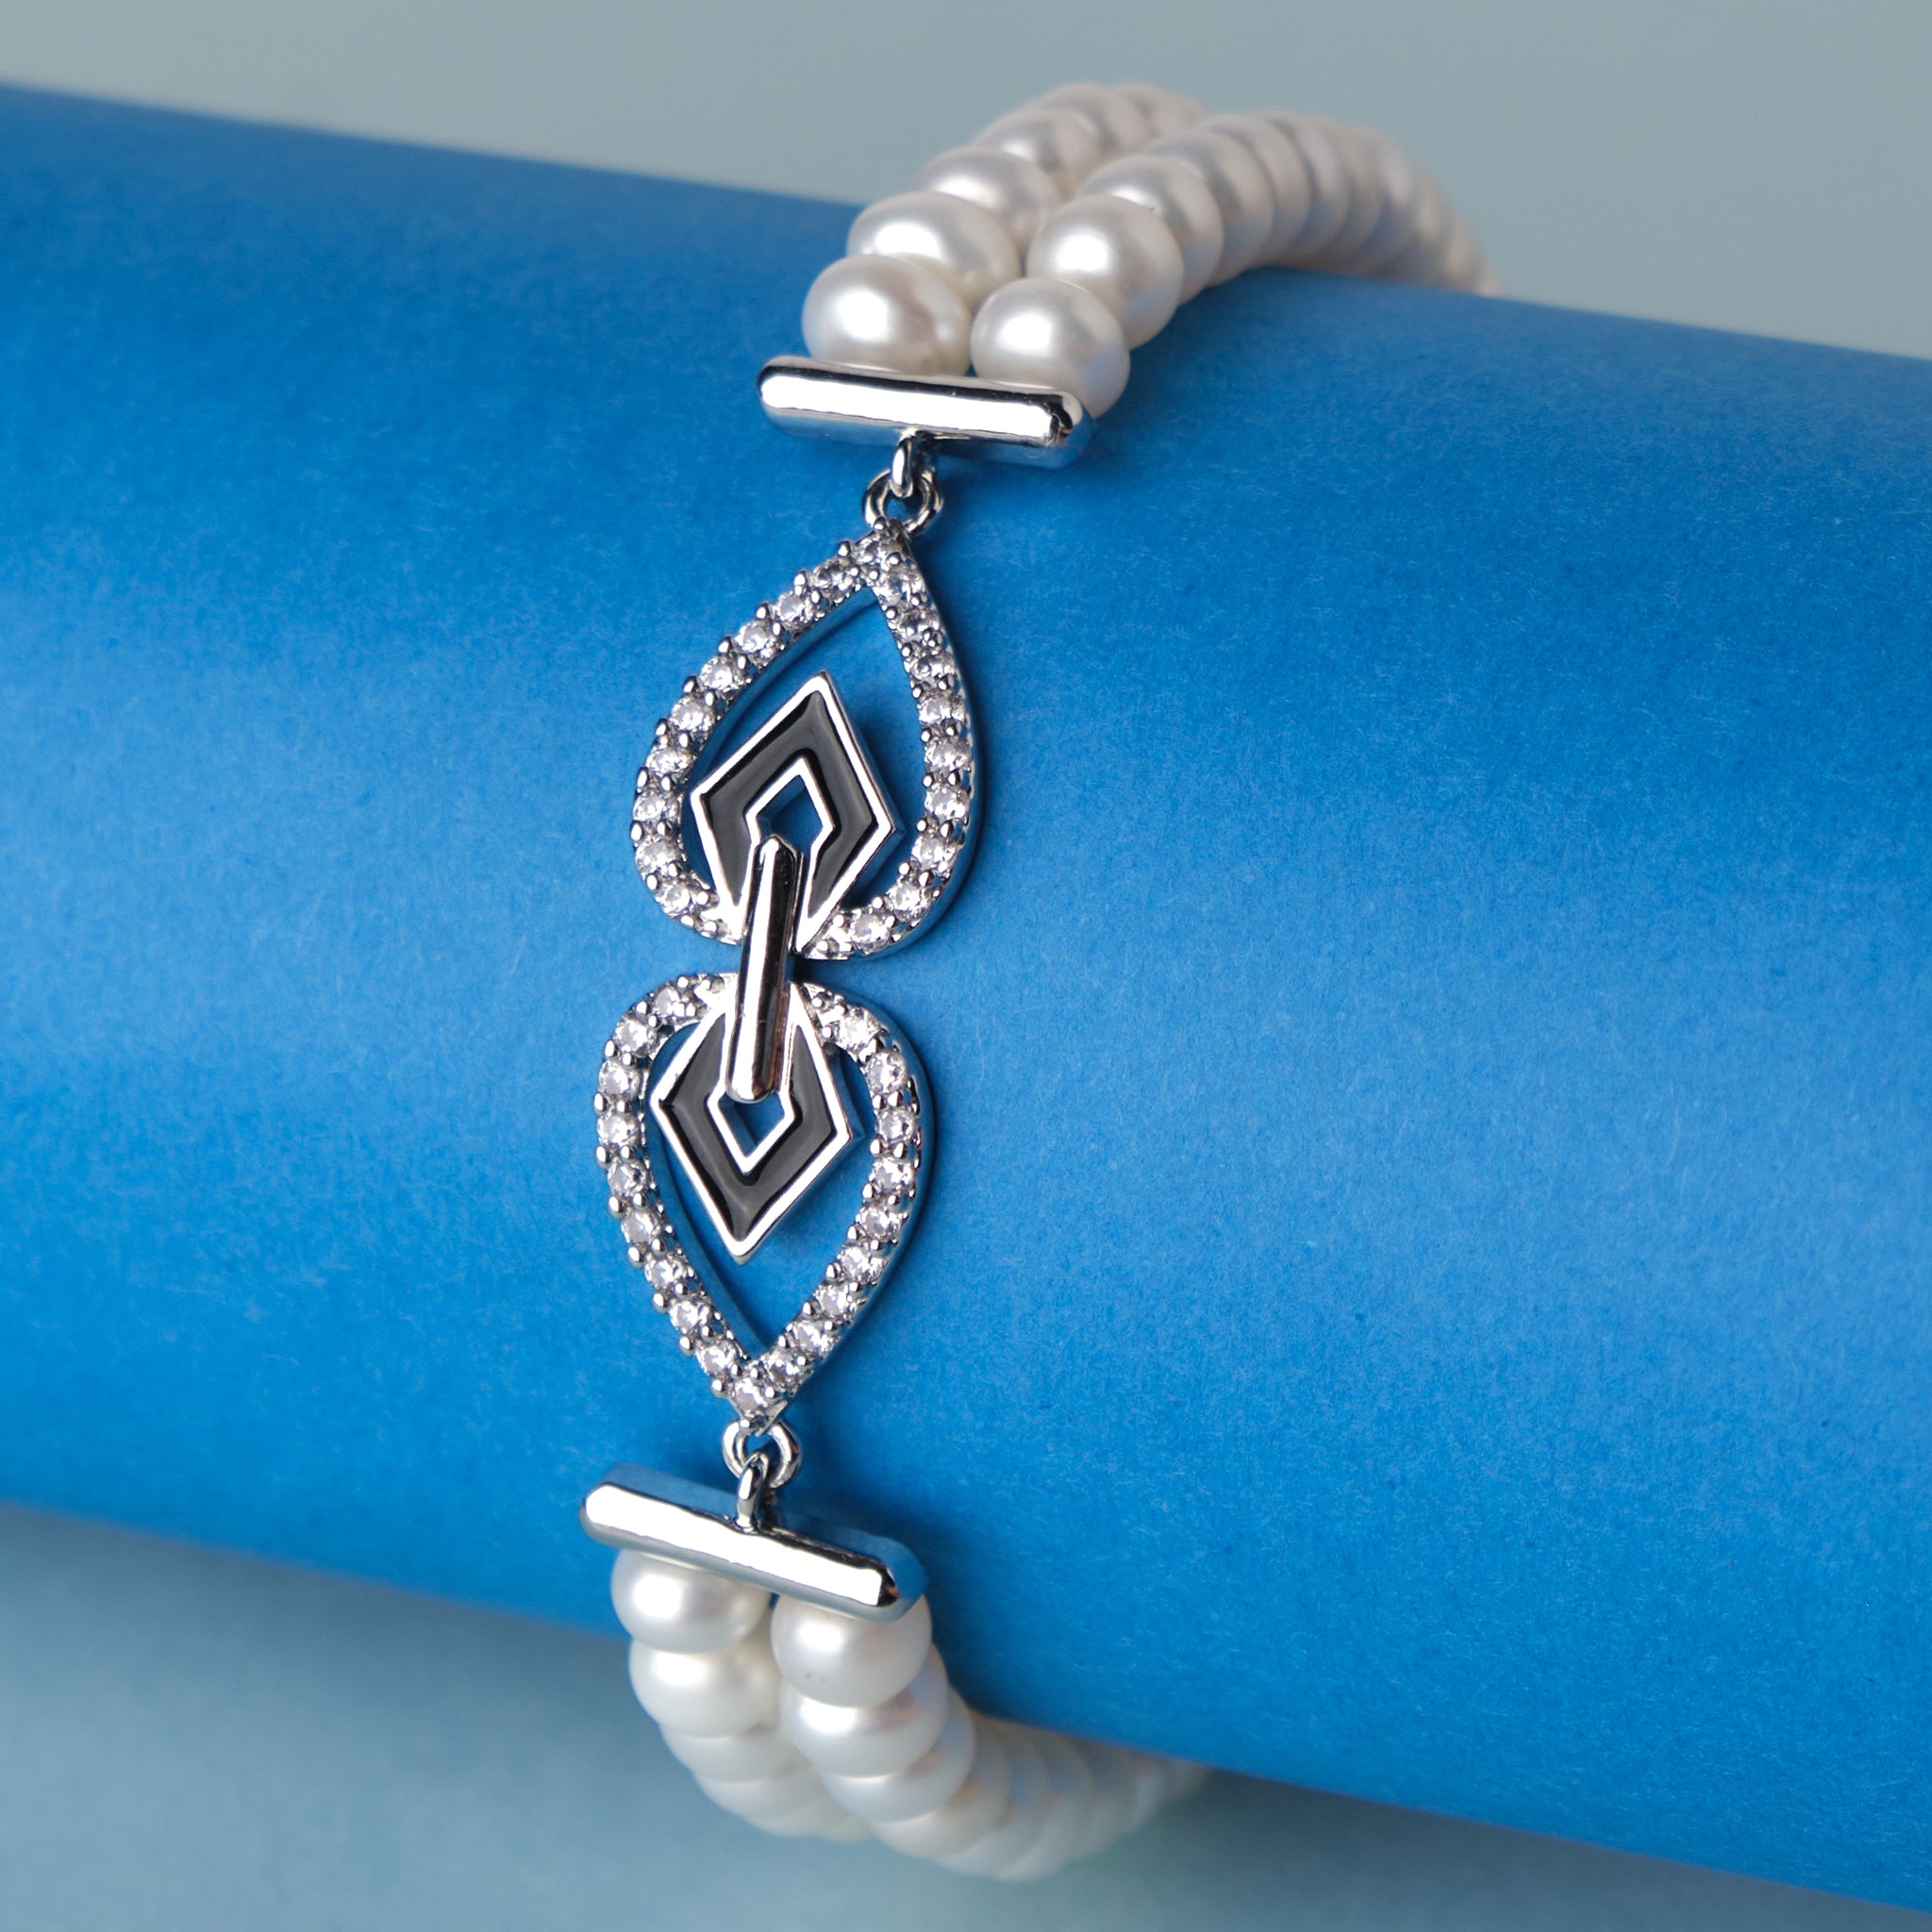 The Chandrani Pearls Modish Stone Studded Pearl Bracelet with diamonds on a blue background.